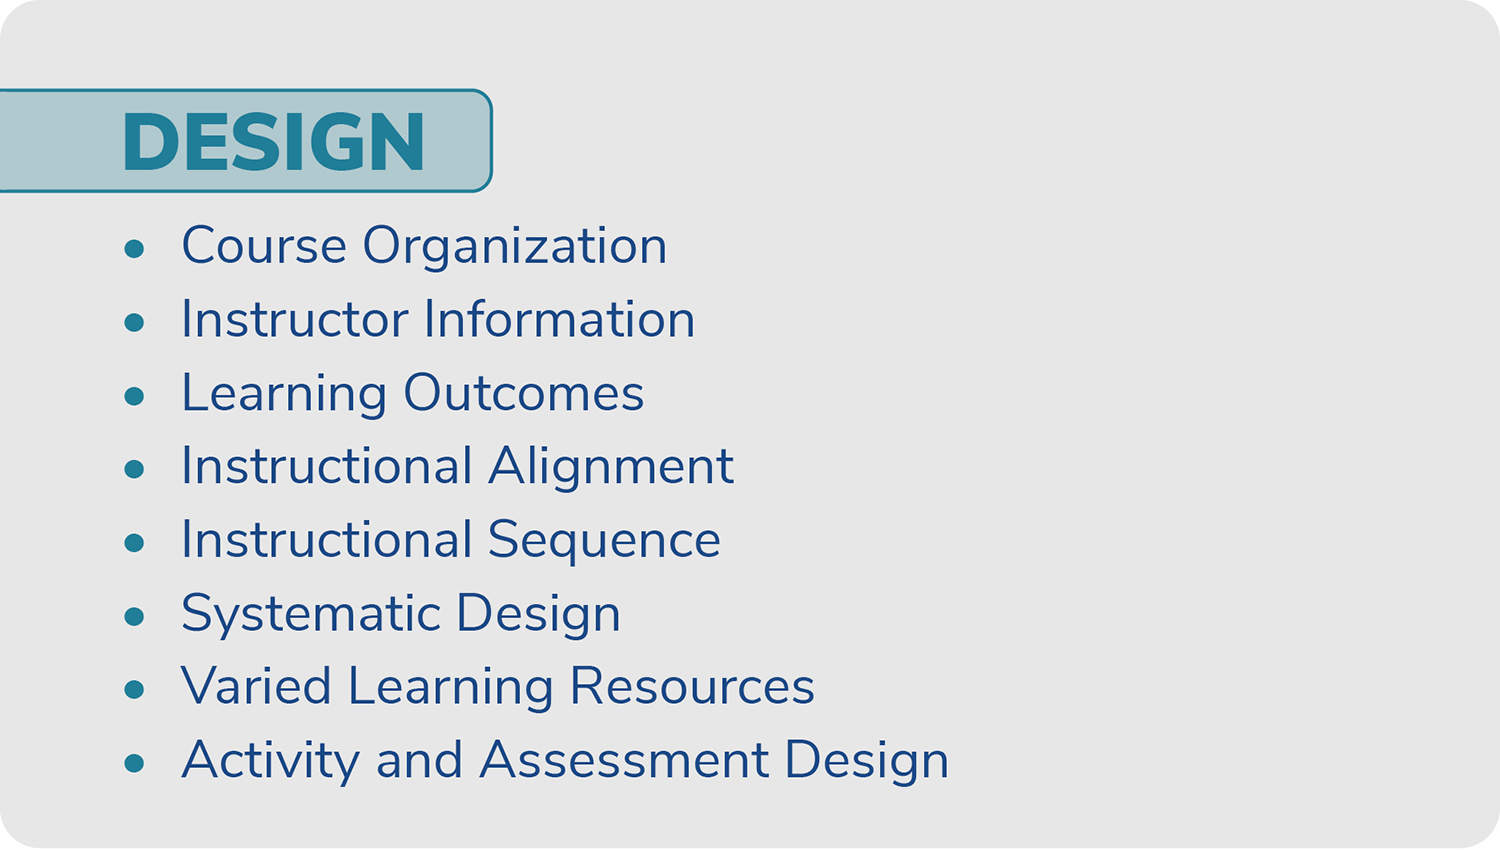 A bulleted list of the eight elements of the 'Design' dimension of the IDEAS Framework: Course Organization; Instructor Information; Learning Outcomes; Instructional Alignment; Instructional Sequence; Systematic Design; Varied Learning Resources; and Activity and Assessment Design.